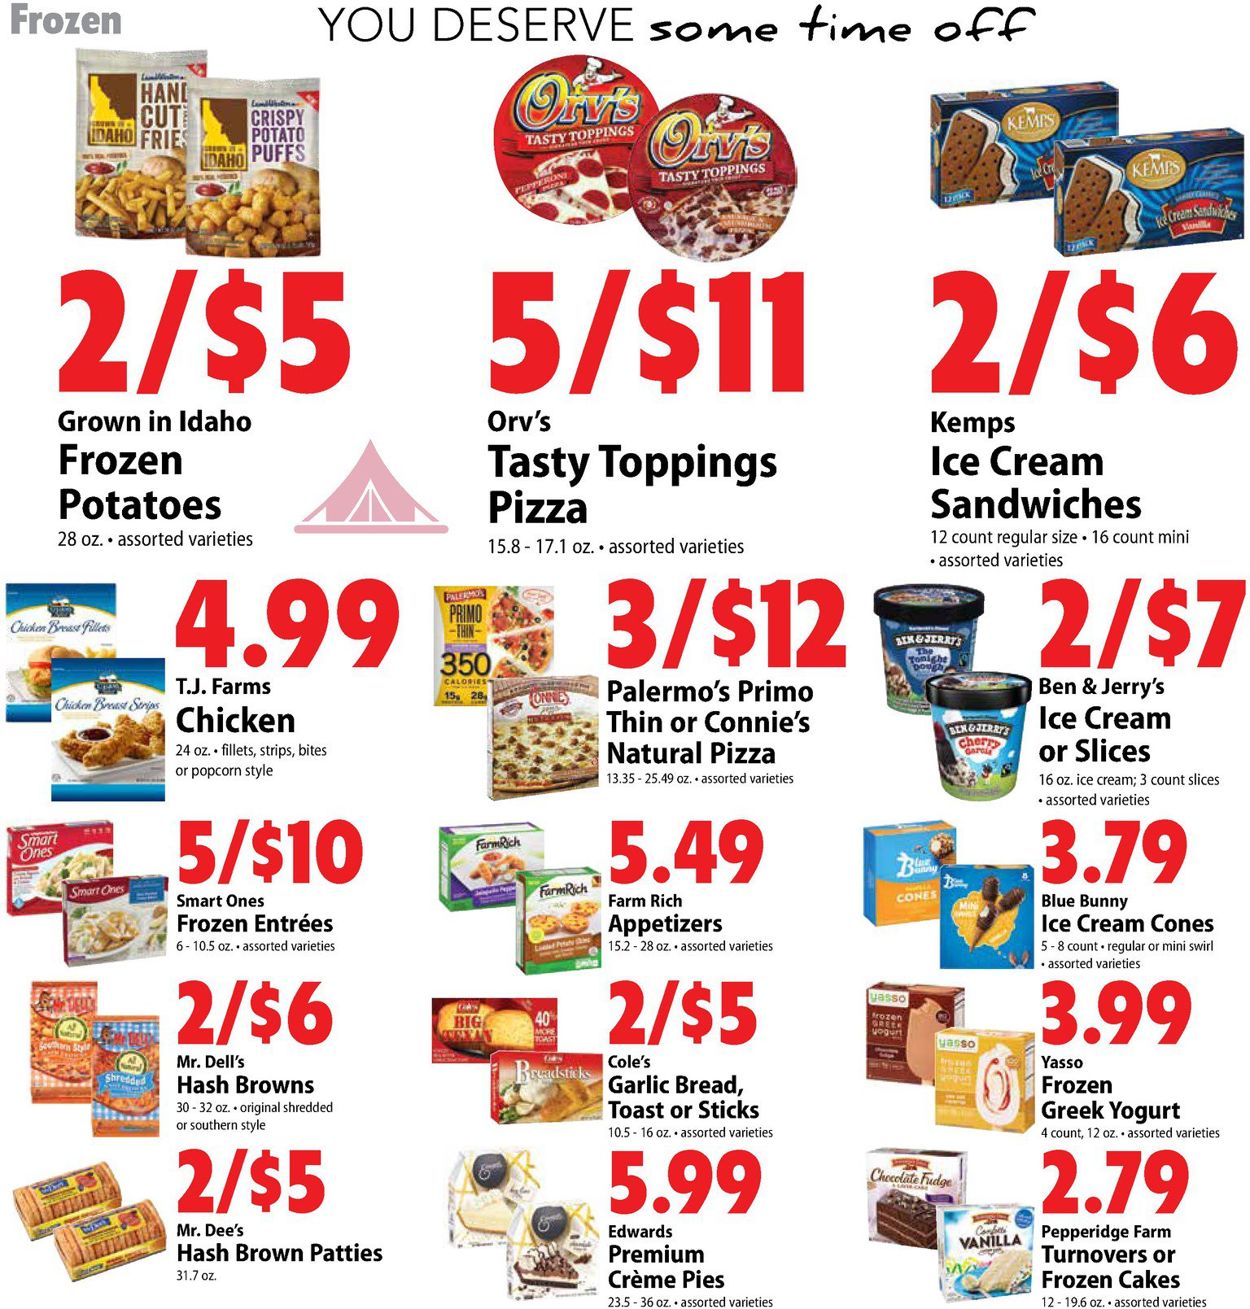 Festival Foods Current weekly ad 08/28 09/03/2019 [11]